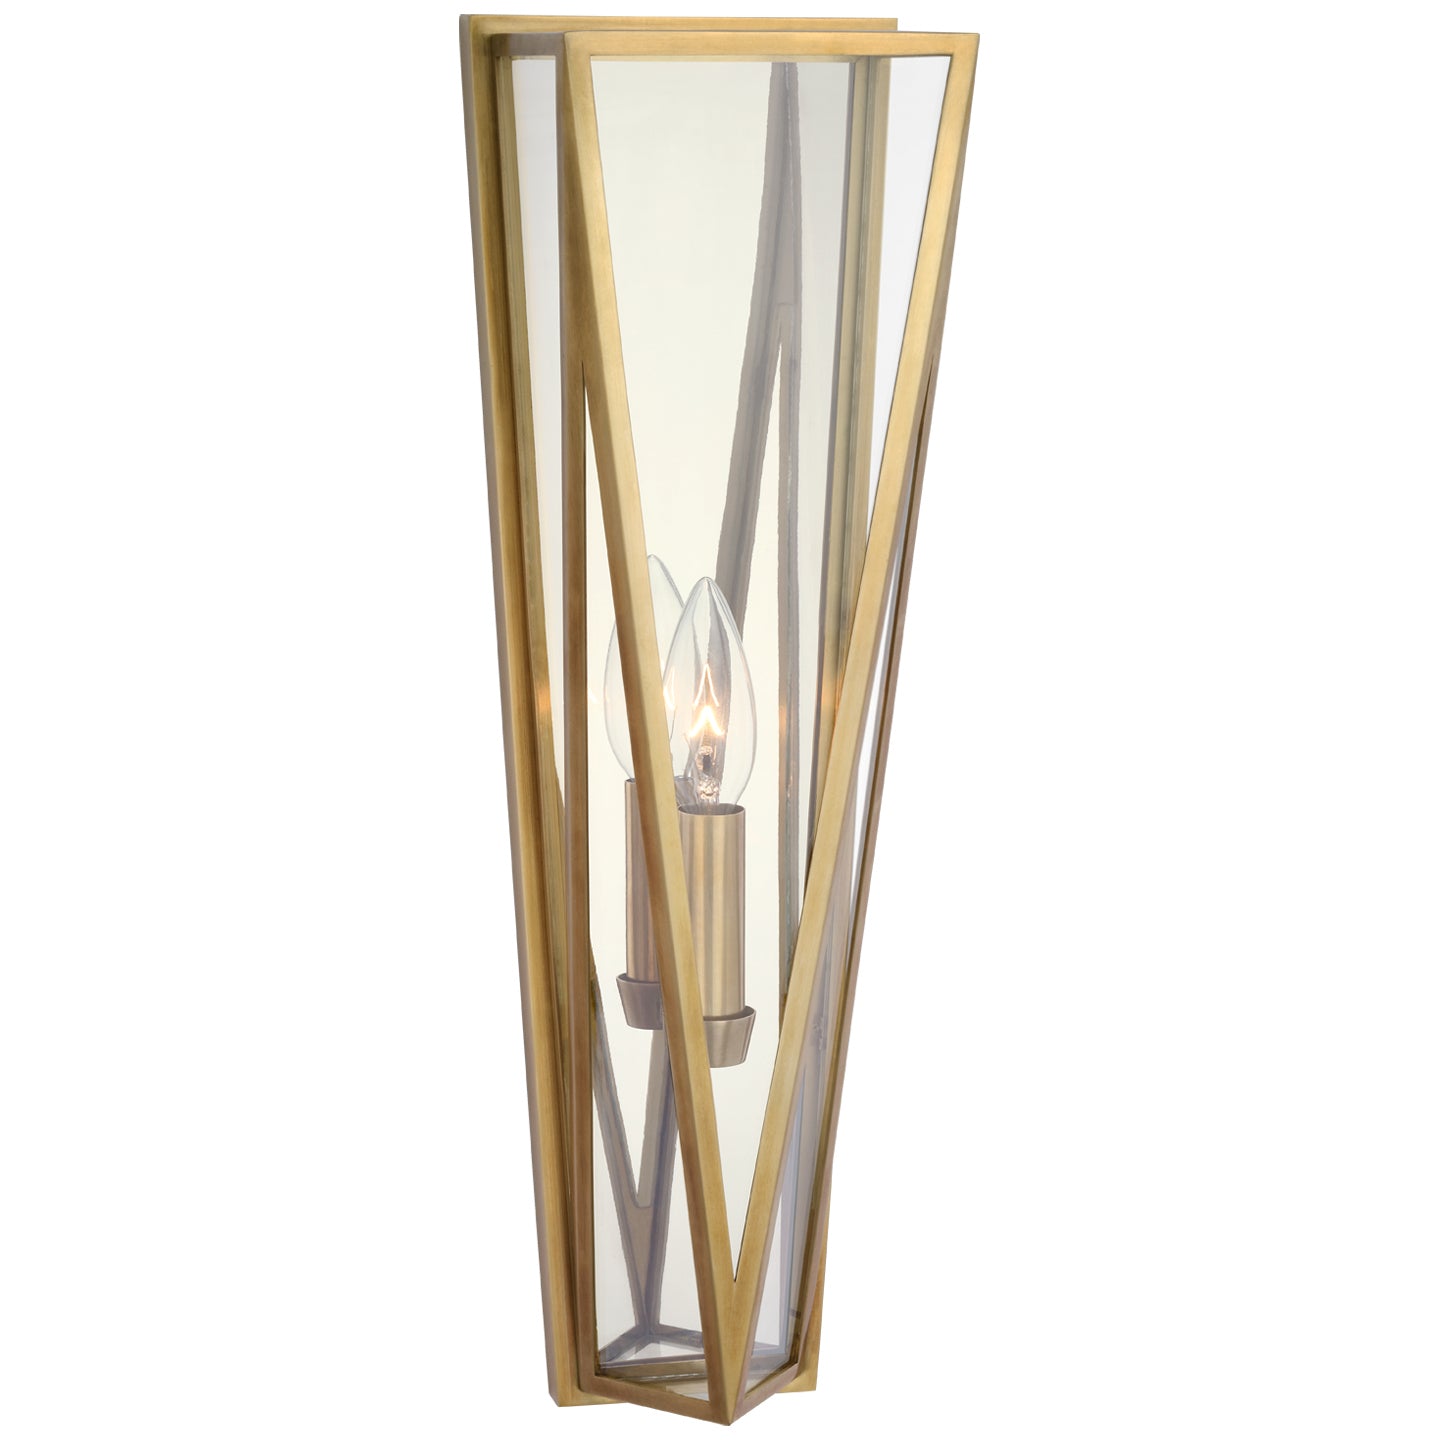 Visual Comfort Signature - JN 2240HAB-CG - LED Wall Sconce - Lorino - Hand-Rubbed Antique Brass